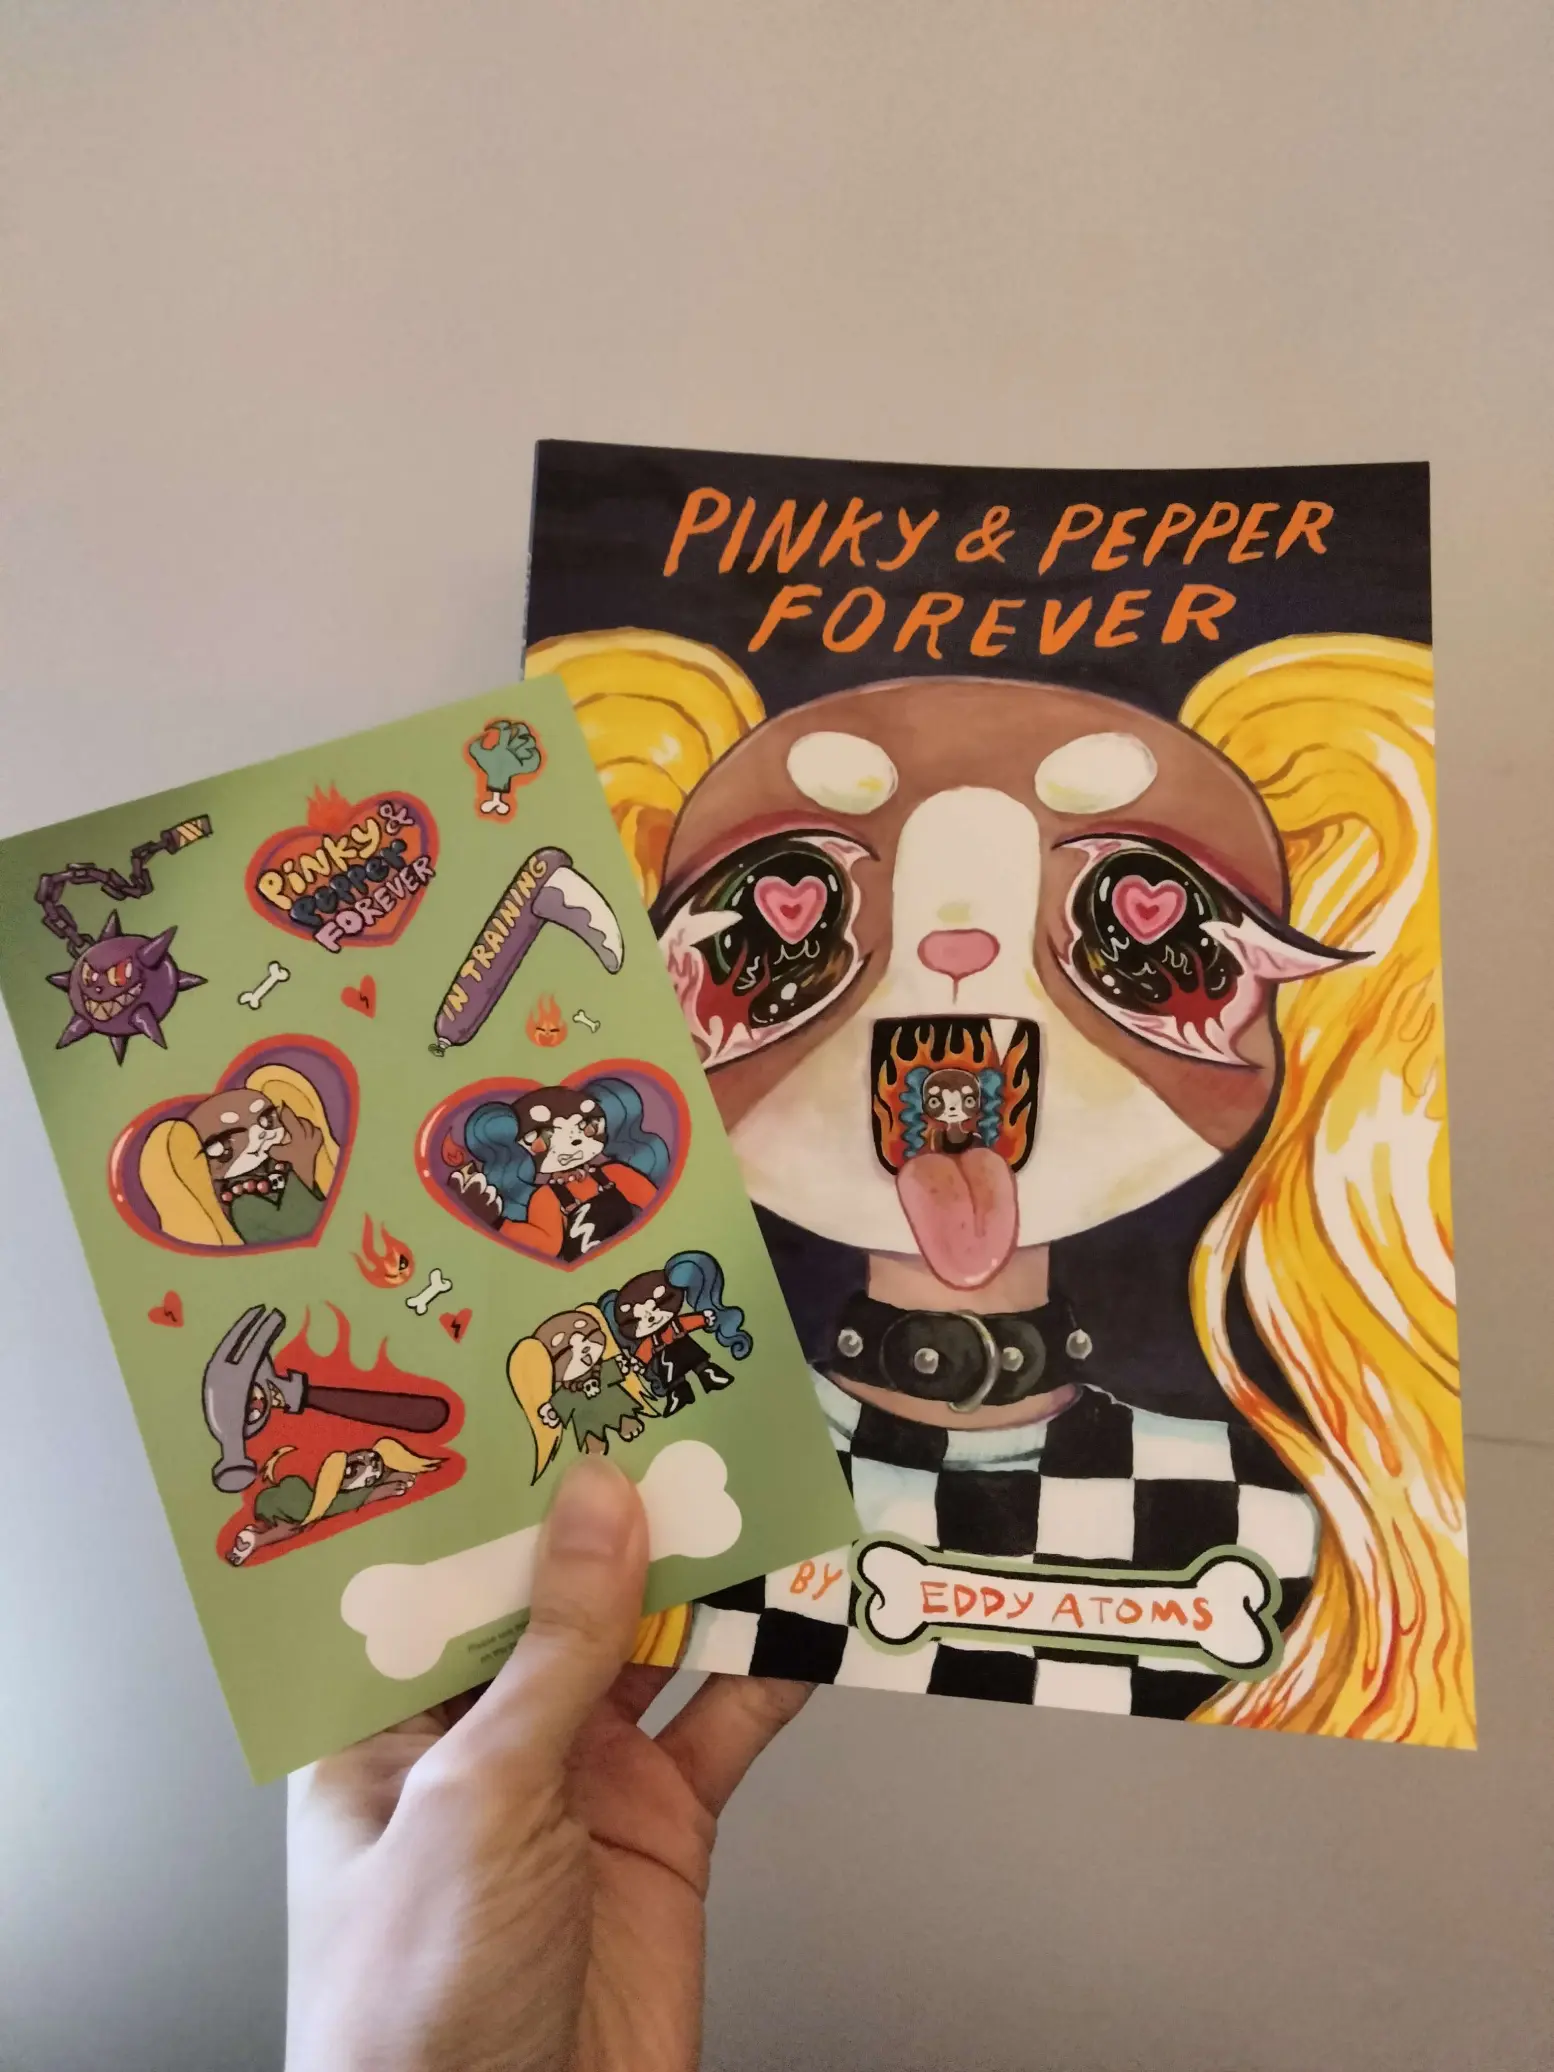 A photo of the physical comic and sticker sheet.